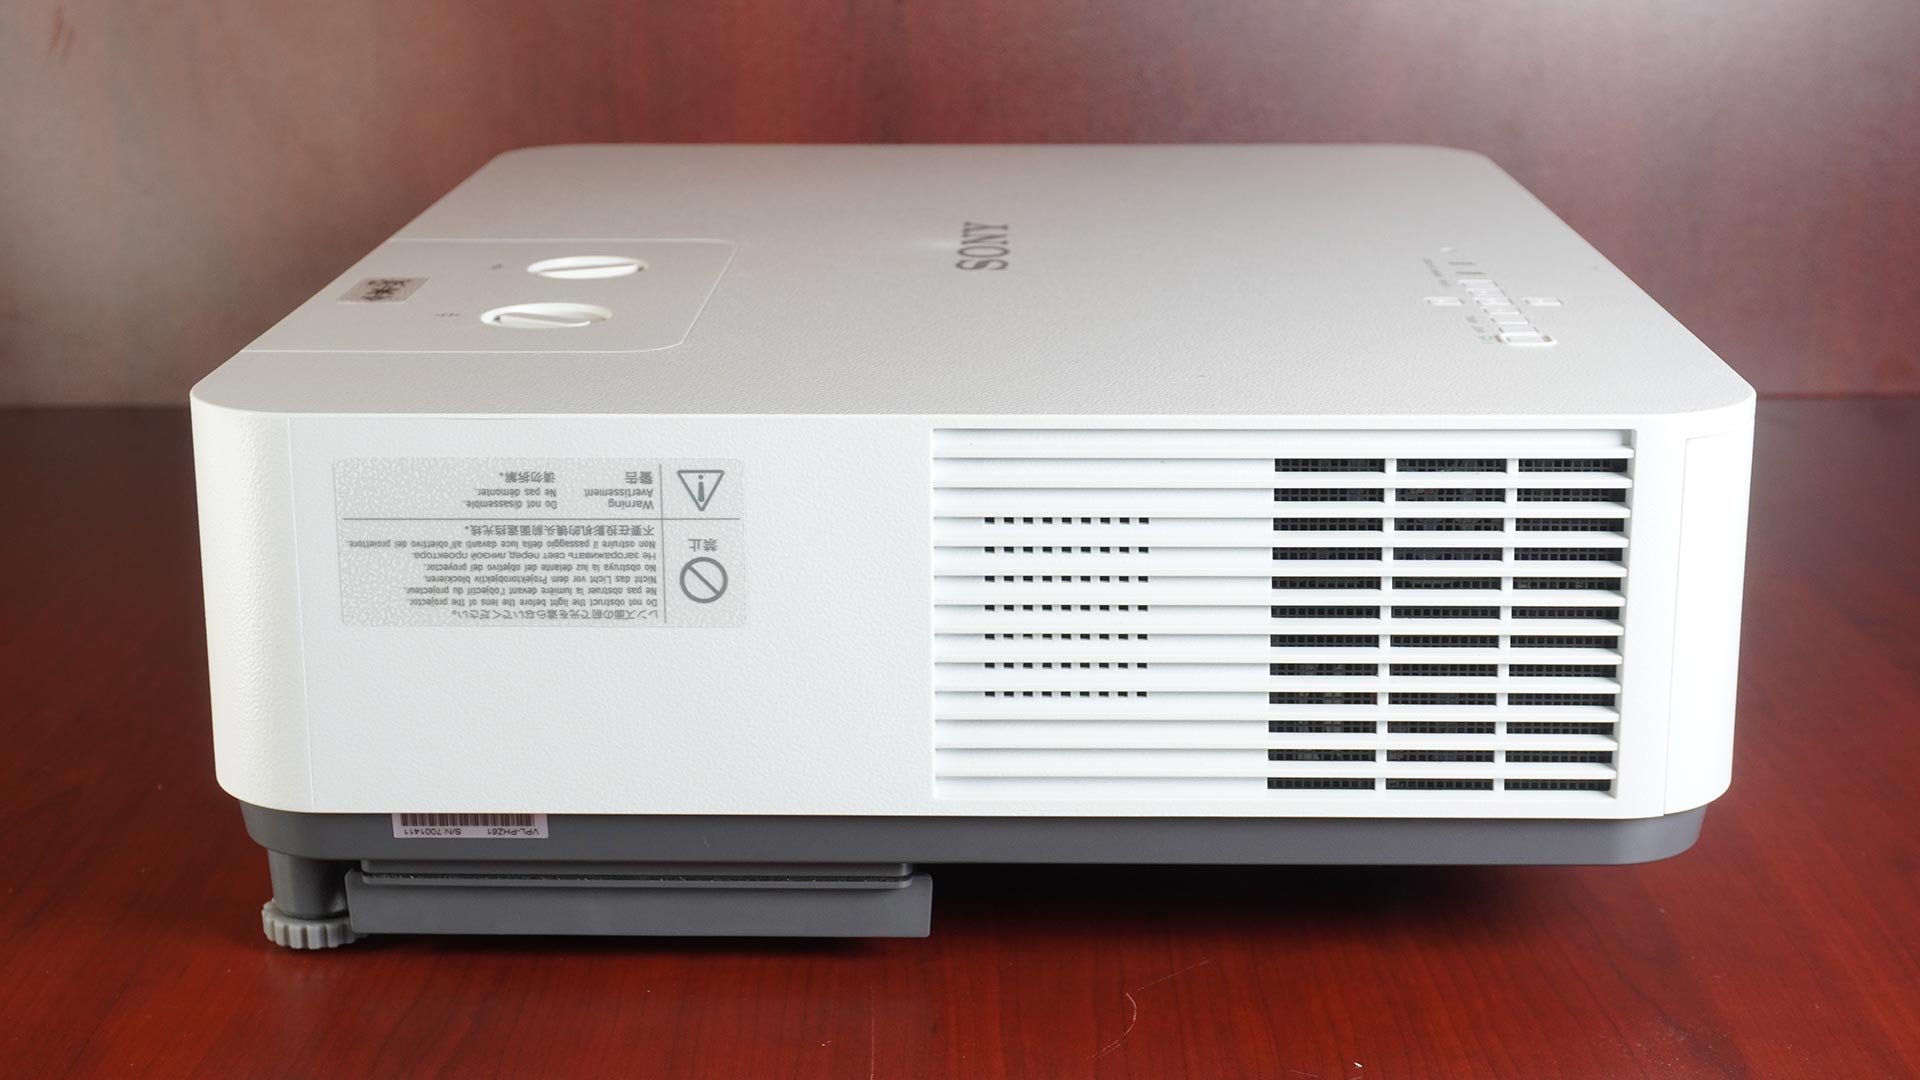 Xgimi Mogo 2 Pro Projector Chassis - Projector Reviews - Image